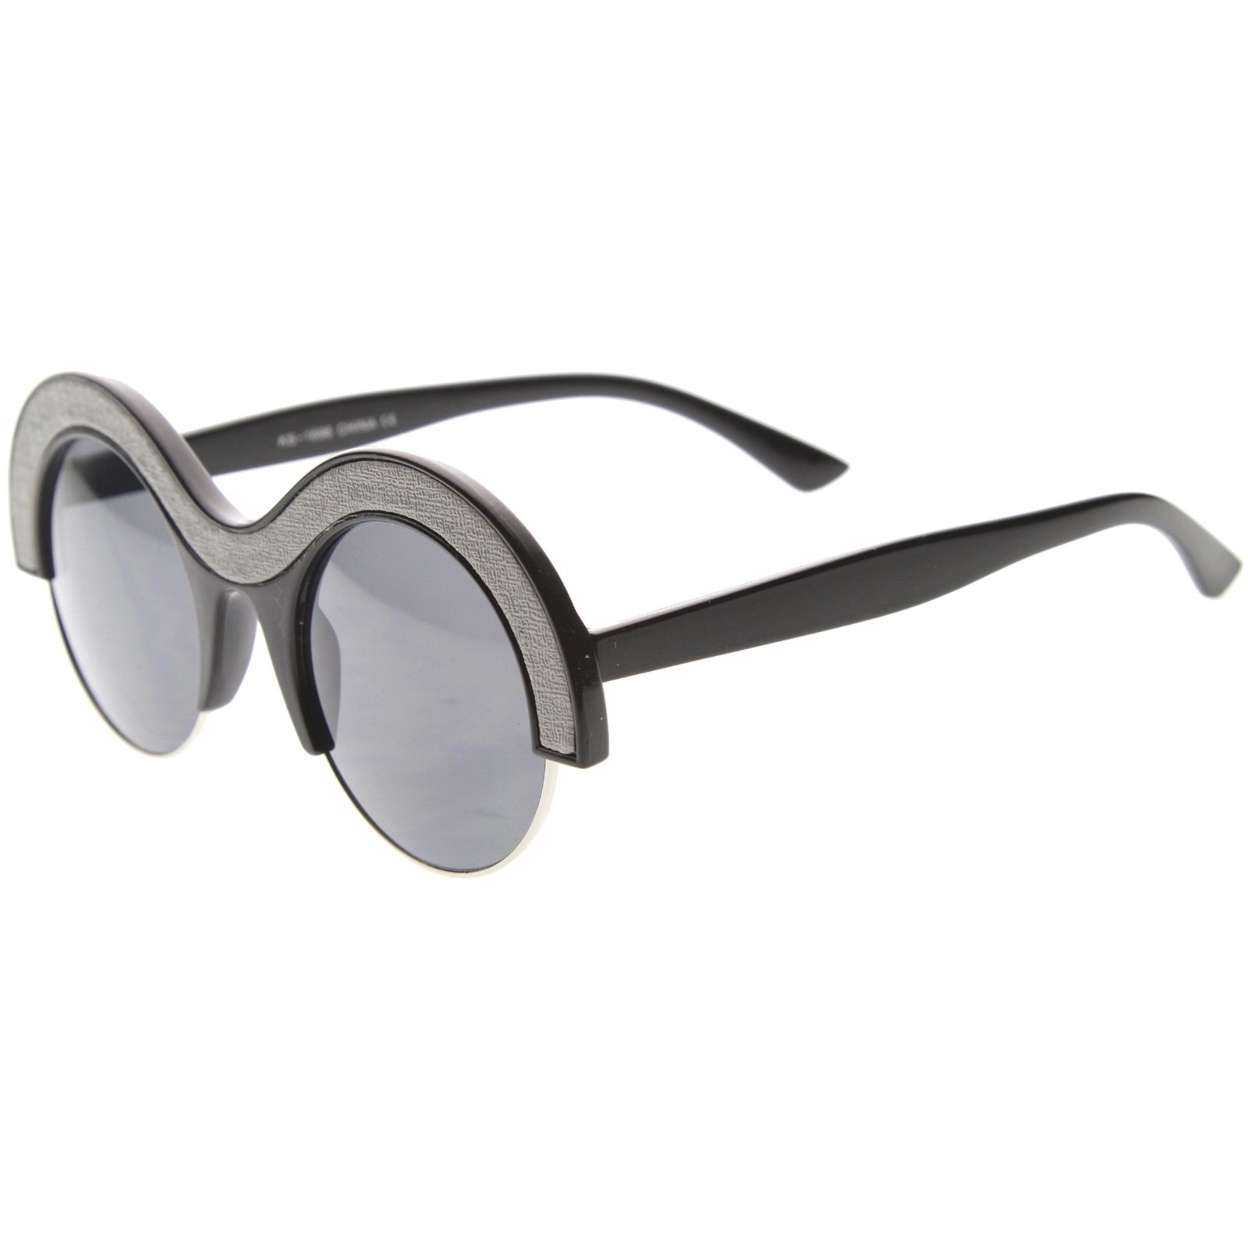 Womens Round Sunglasses With UV400 Protected Mirrored Lens - Black-Grey / Midnight